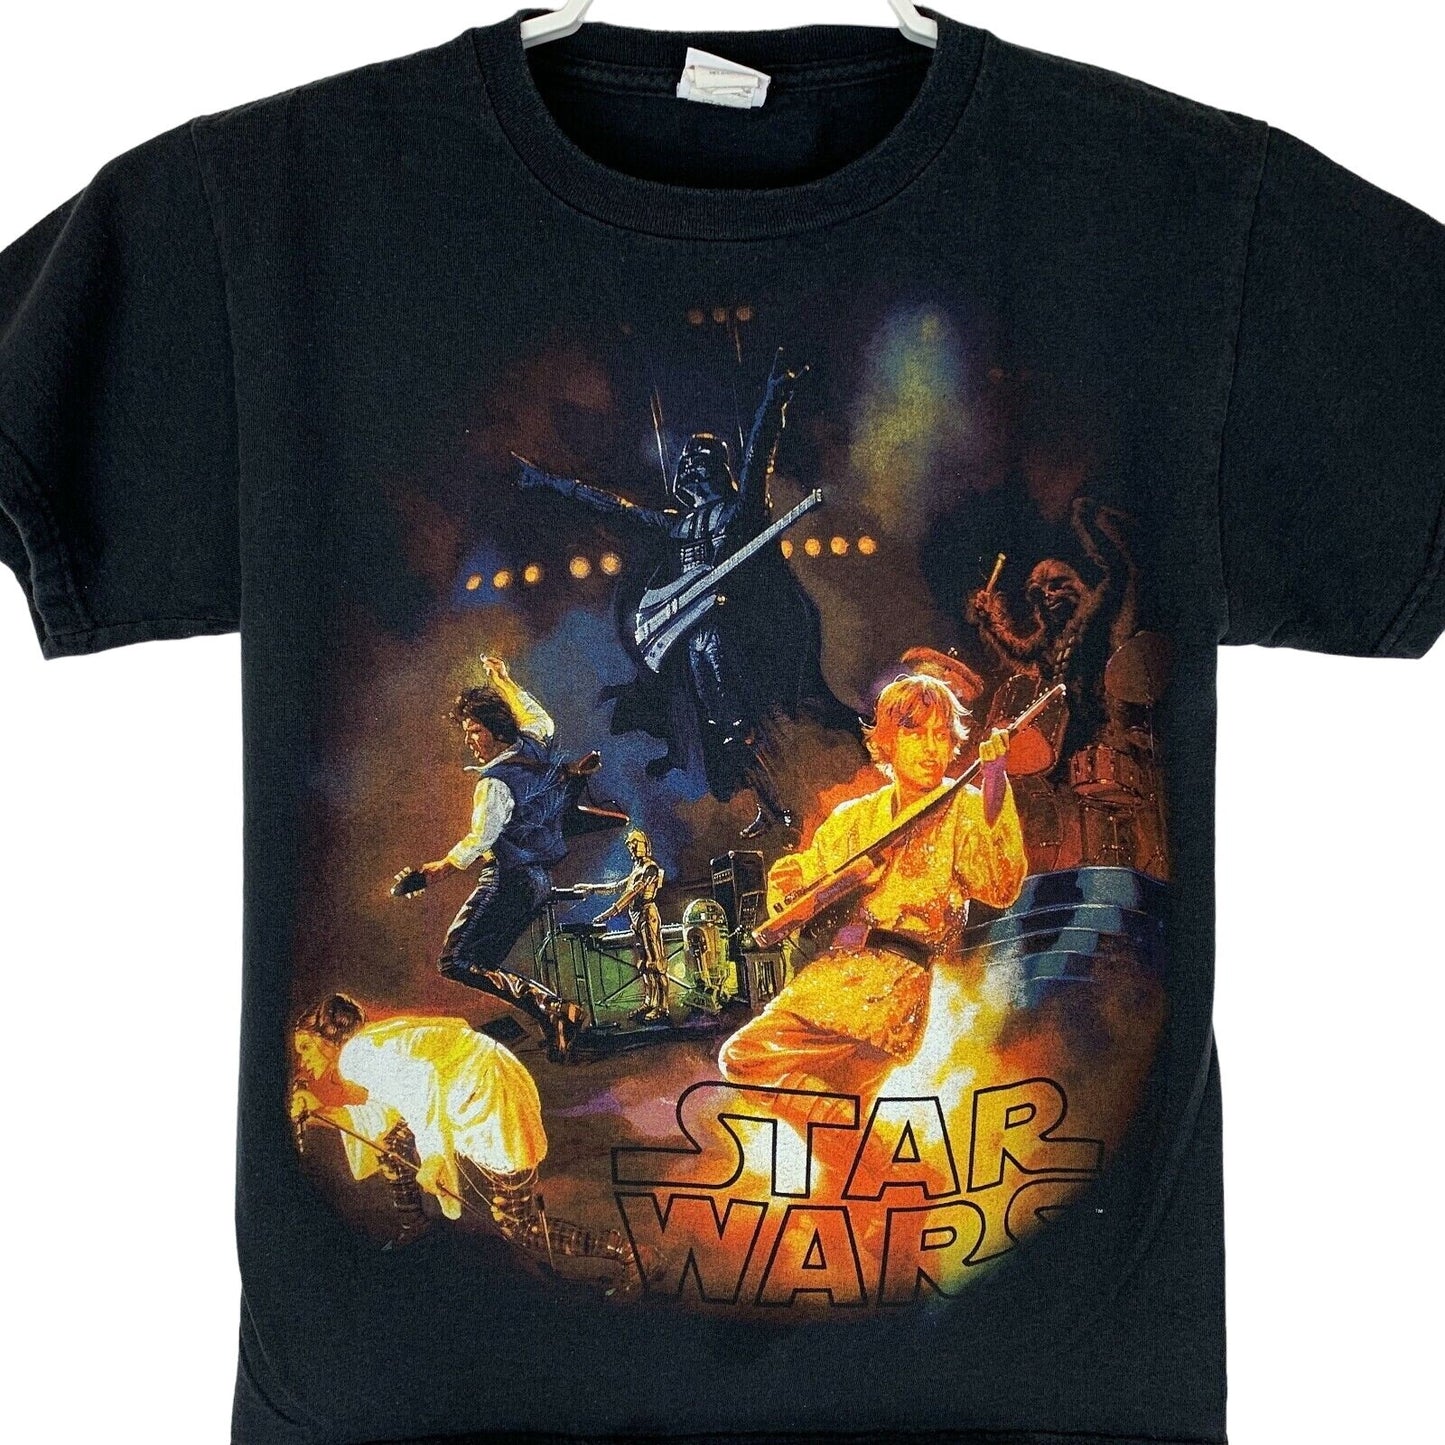 Star Wars as Rock Band T Shirt Chewbacca Han Solo R2-D2 C-3PO Darth Vader Small